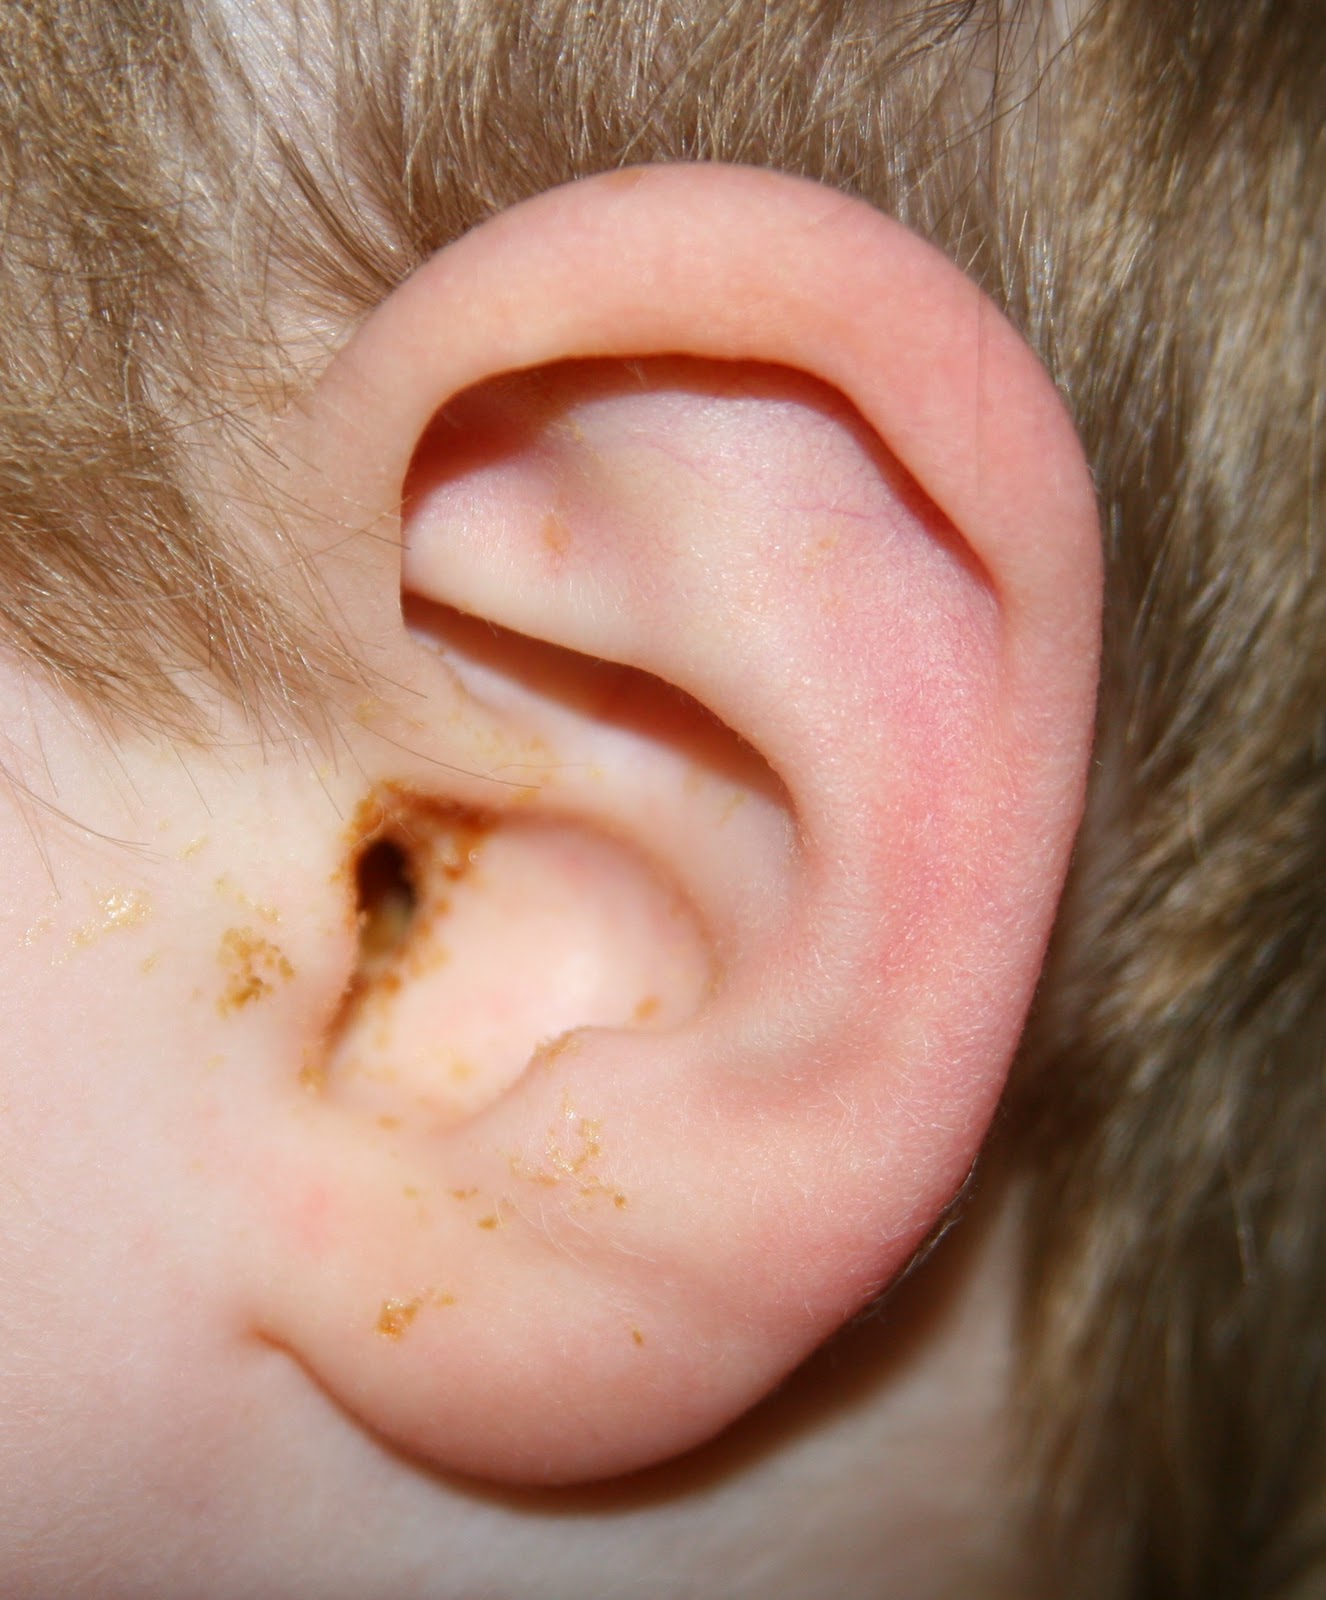 Ear Infection (Middle Ear) Causes, Symptoms, Diagnosis and 